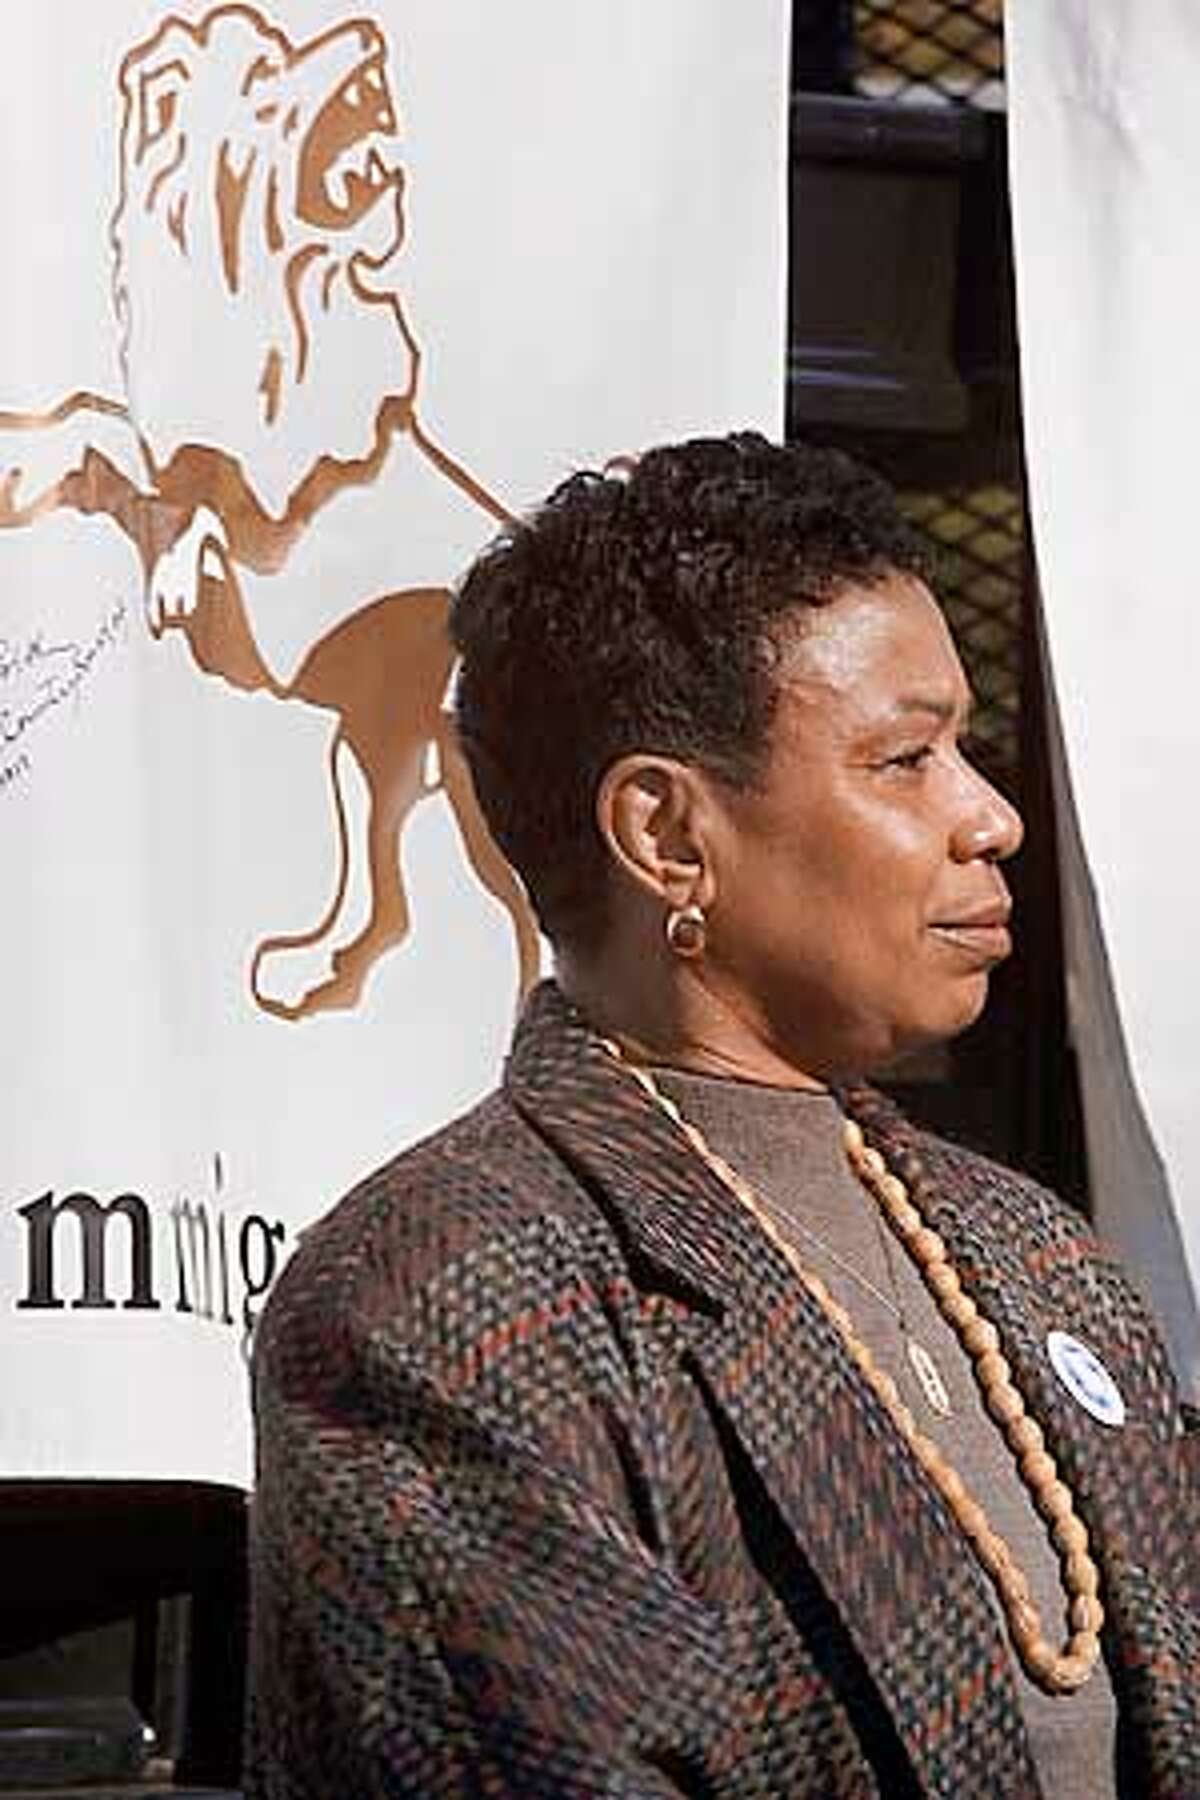 ( ) 27 Jan 2001 -- Oakland, CA, Congresswoman Barbara Lee speaking at Rally for Migrant Amnesty and Immigrant Rights, sponsored by the Labor and Immigrant Organizing Network (LION), Oakland, CA. Photo by Lonny Shavelson/PictureDesk International --COPYRIGHT 2001.-